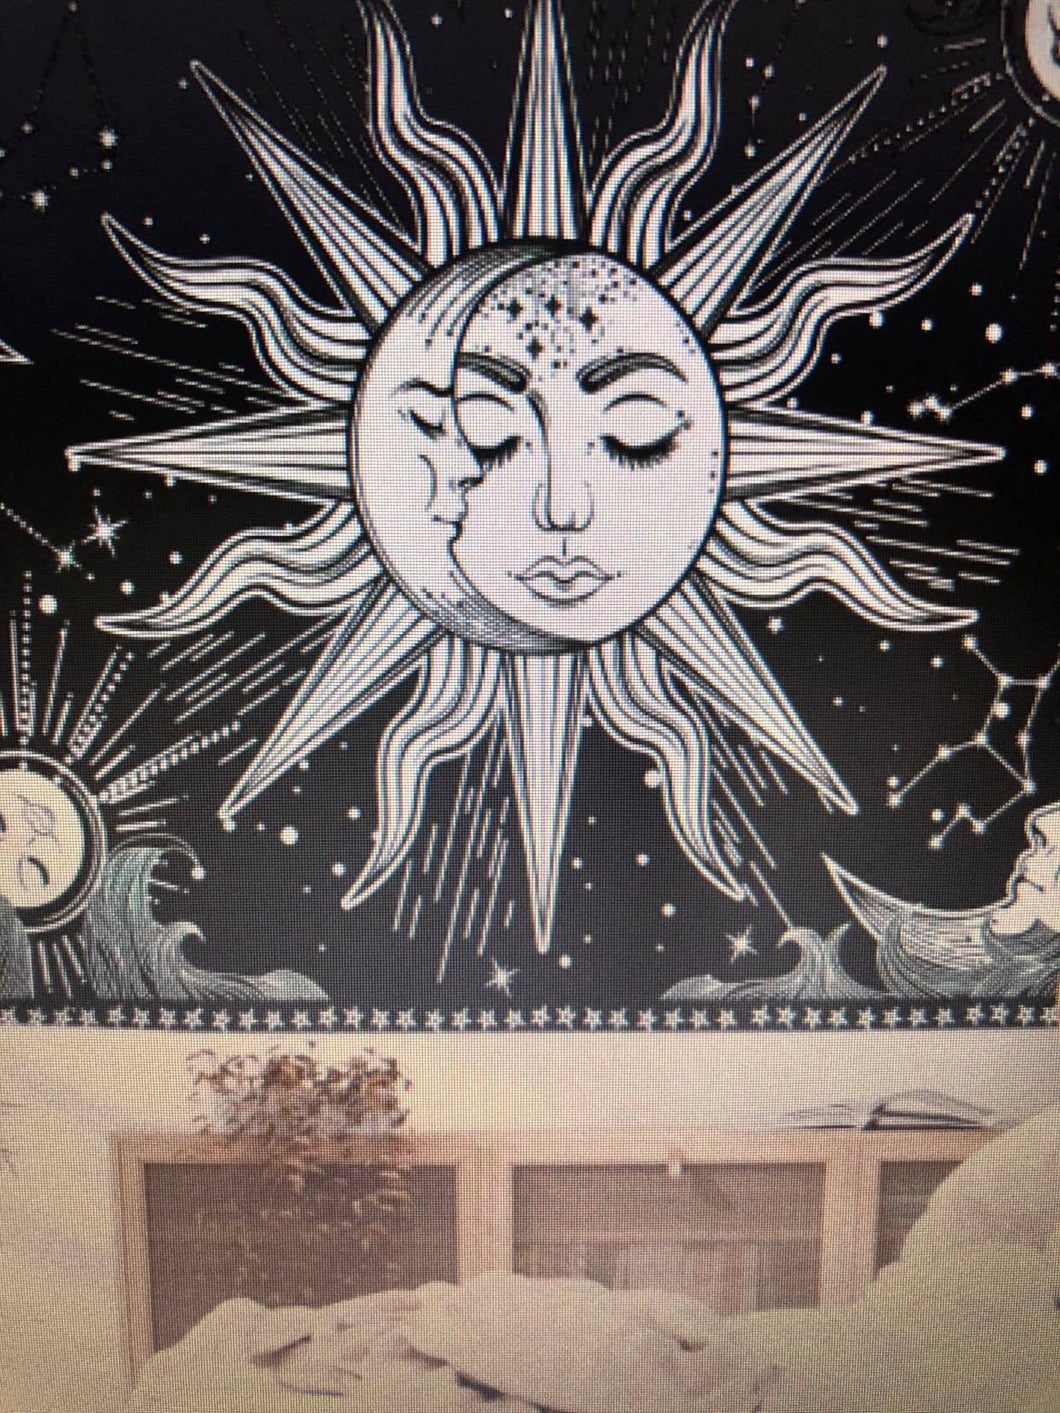 Sun and Moon Tapestry Black and White